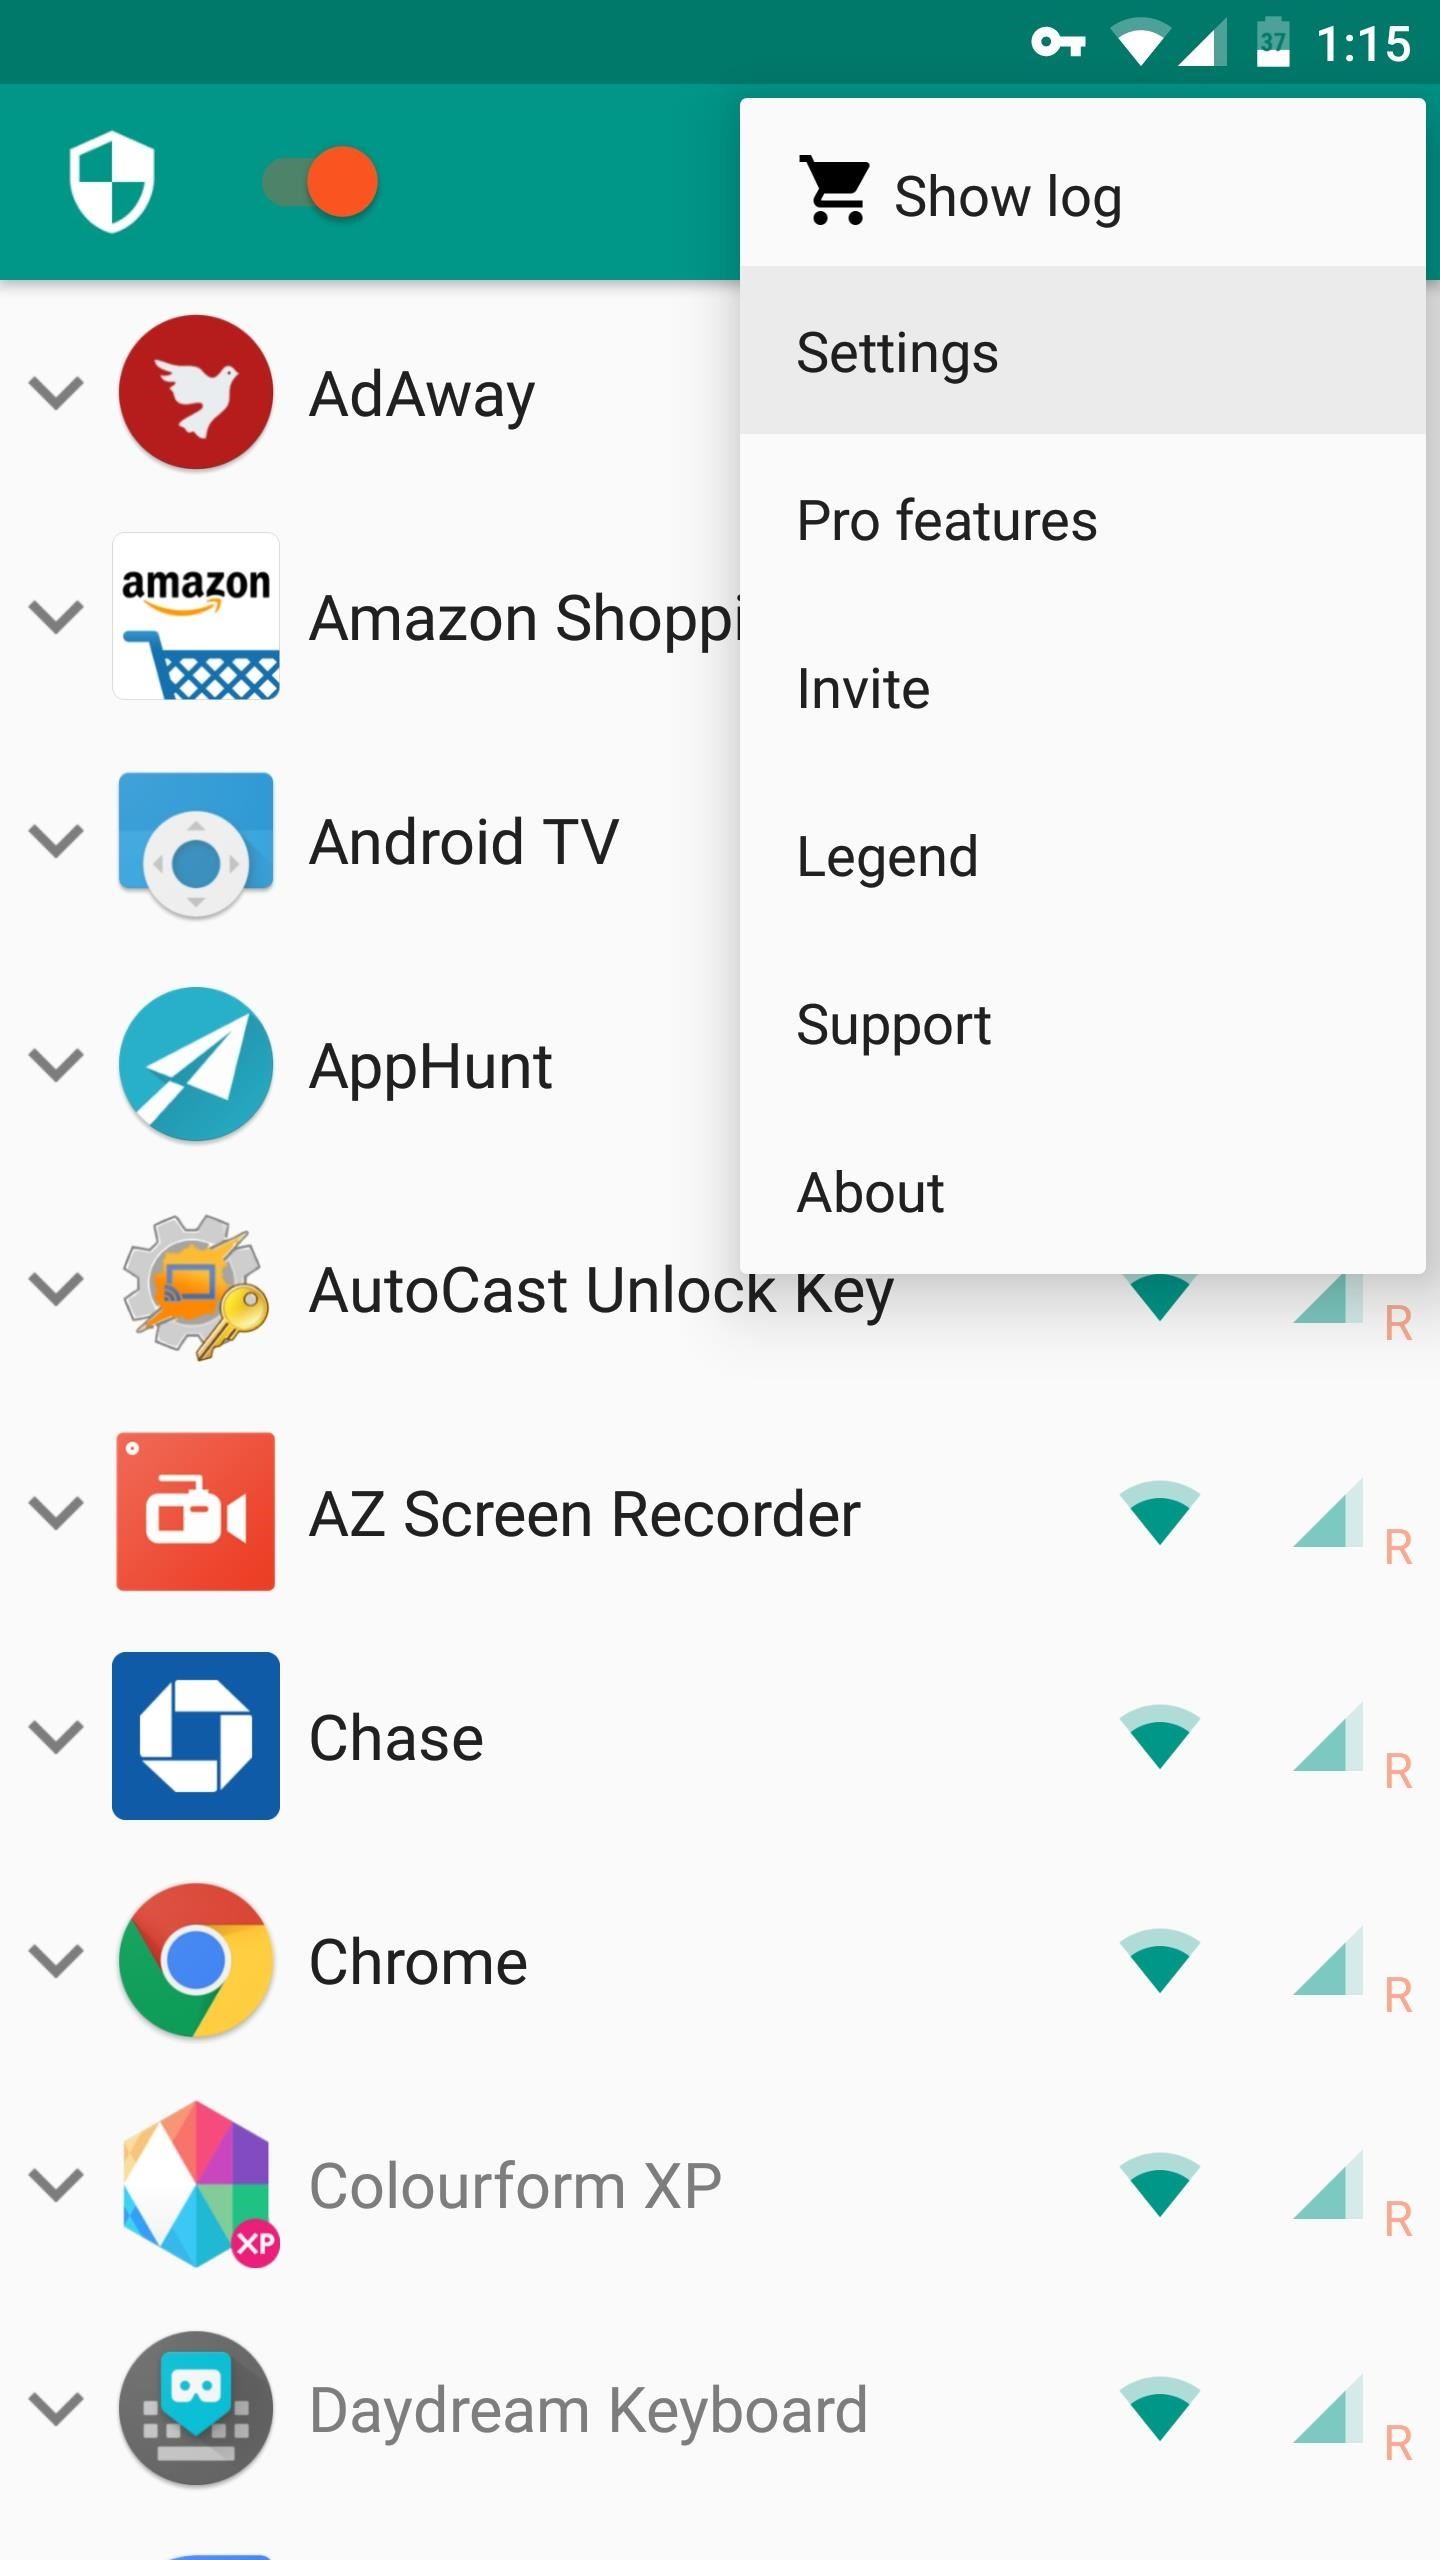 Enable NetGuard's Hidden Ad-Blocking Feature on Your Android Phone